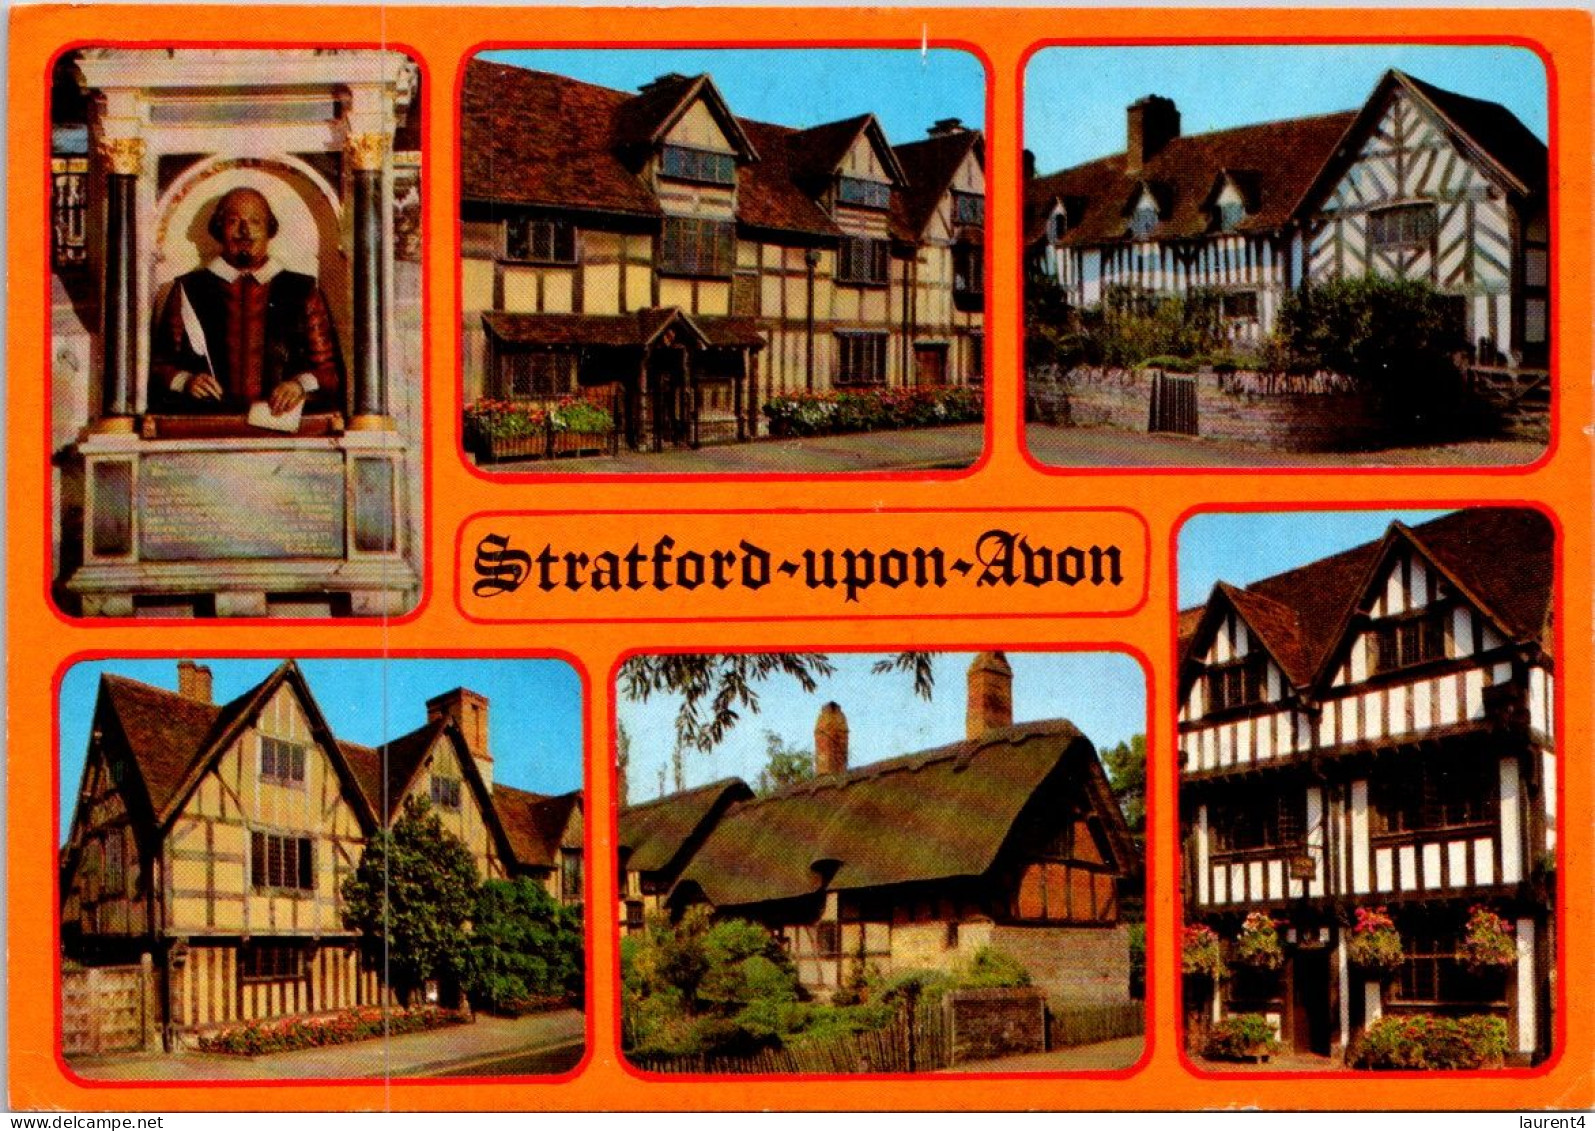 (1 Q 23) UK Posted Within Australia1990 - City Of Stratford Upon Avon (unusual Travelled Without Posrtmark !) - Stratford Upon Avon